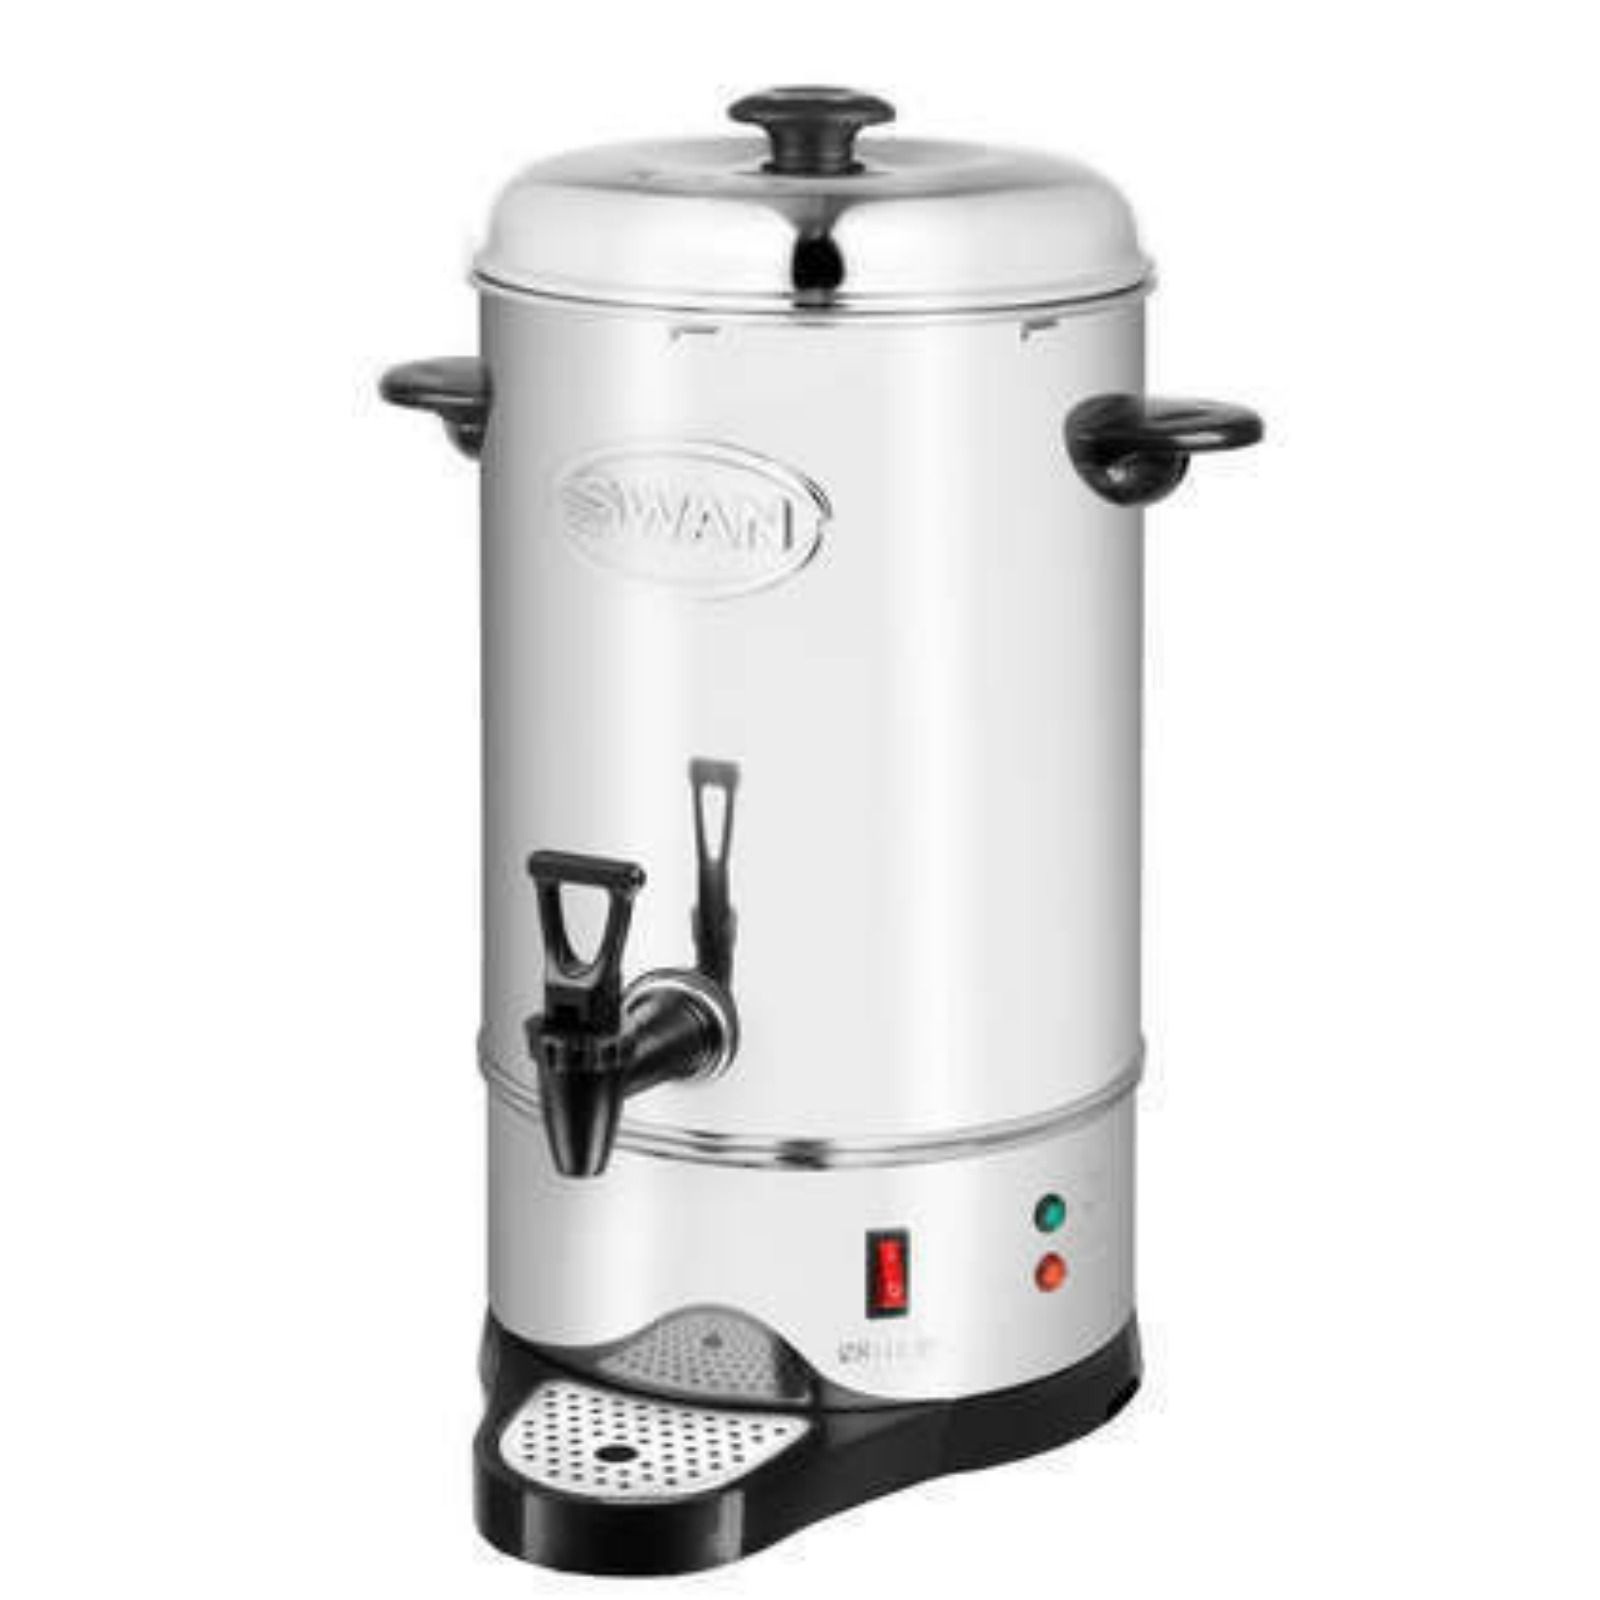 2500w Electrical 20l Hot Water Boiler & Dispenser Catering Urn Commercial or Office Use Tea Coffee Stainless Steel Design with Water Level Gauge Ideal for Home Brewing 